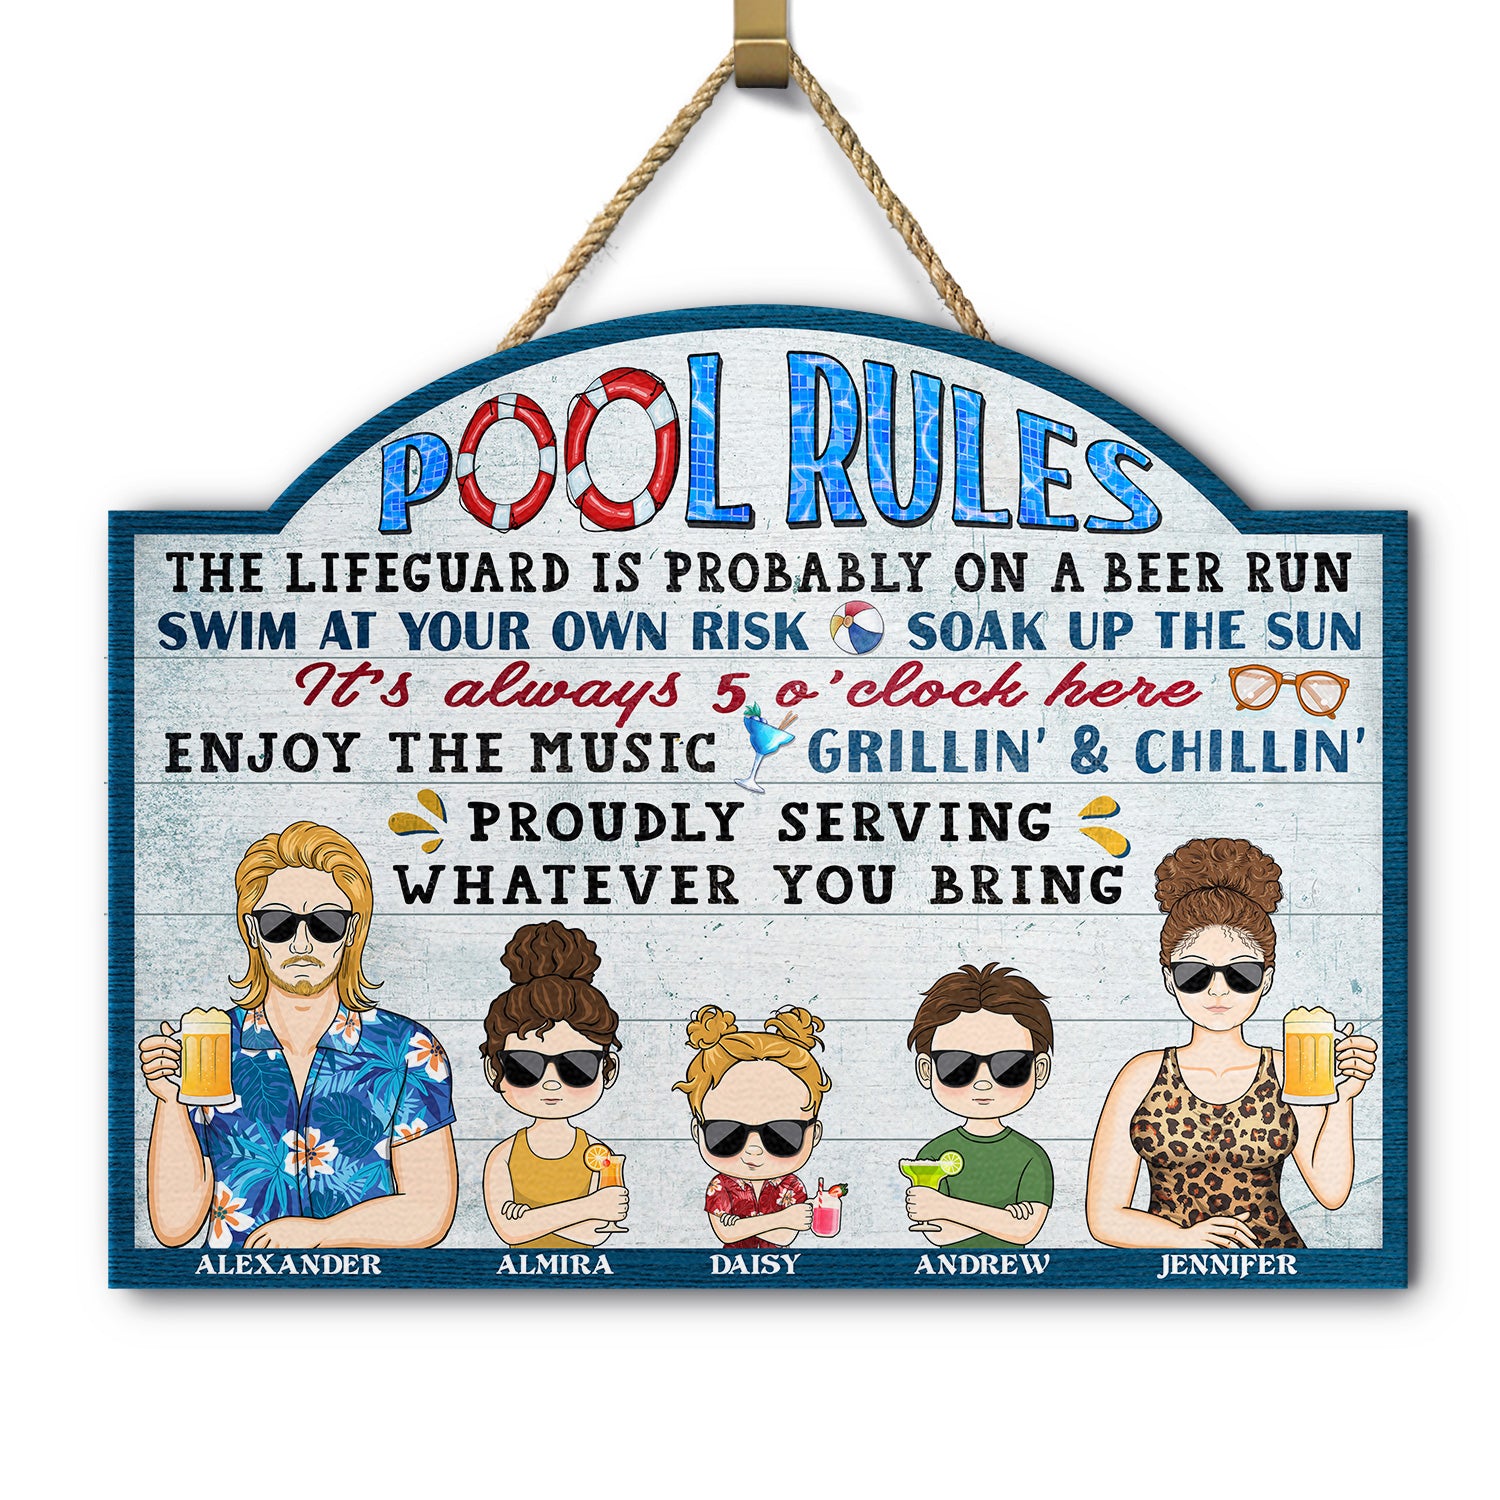 Pool Rules Swim At Your Own Risk Grilling Kids - Home Decor, Backyard Decor, Gift For Her, Him, Family, Couples - Personalized Custom Shaped Wood Sign